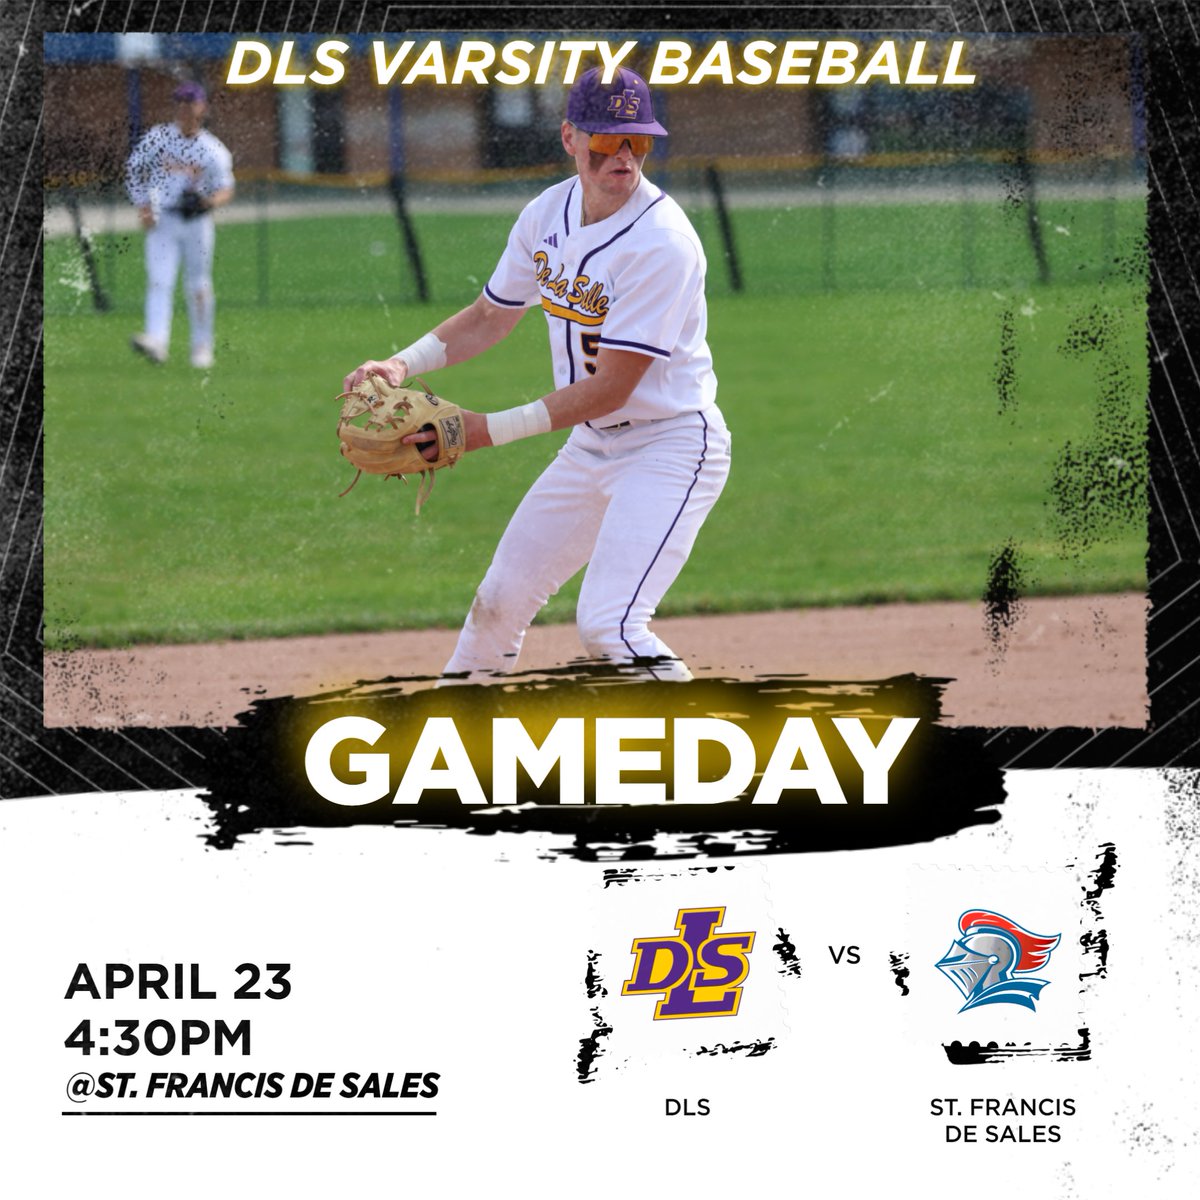 Good luck to DLS Varsity Baseball on the road as they go up against St. Francis de Sales at 4:30PM today, April 23. Let’s go, Pilots! 

#PilotPride @Pilots_Baseball @CHSL1926